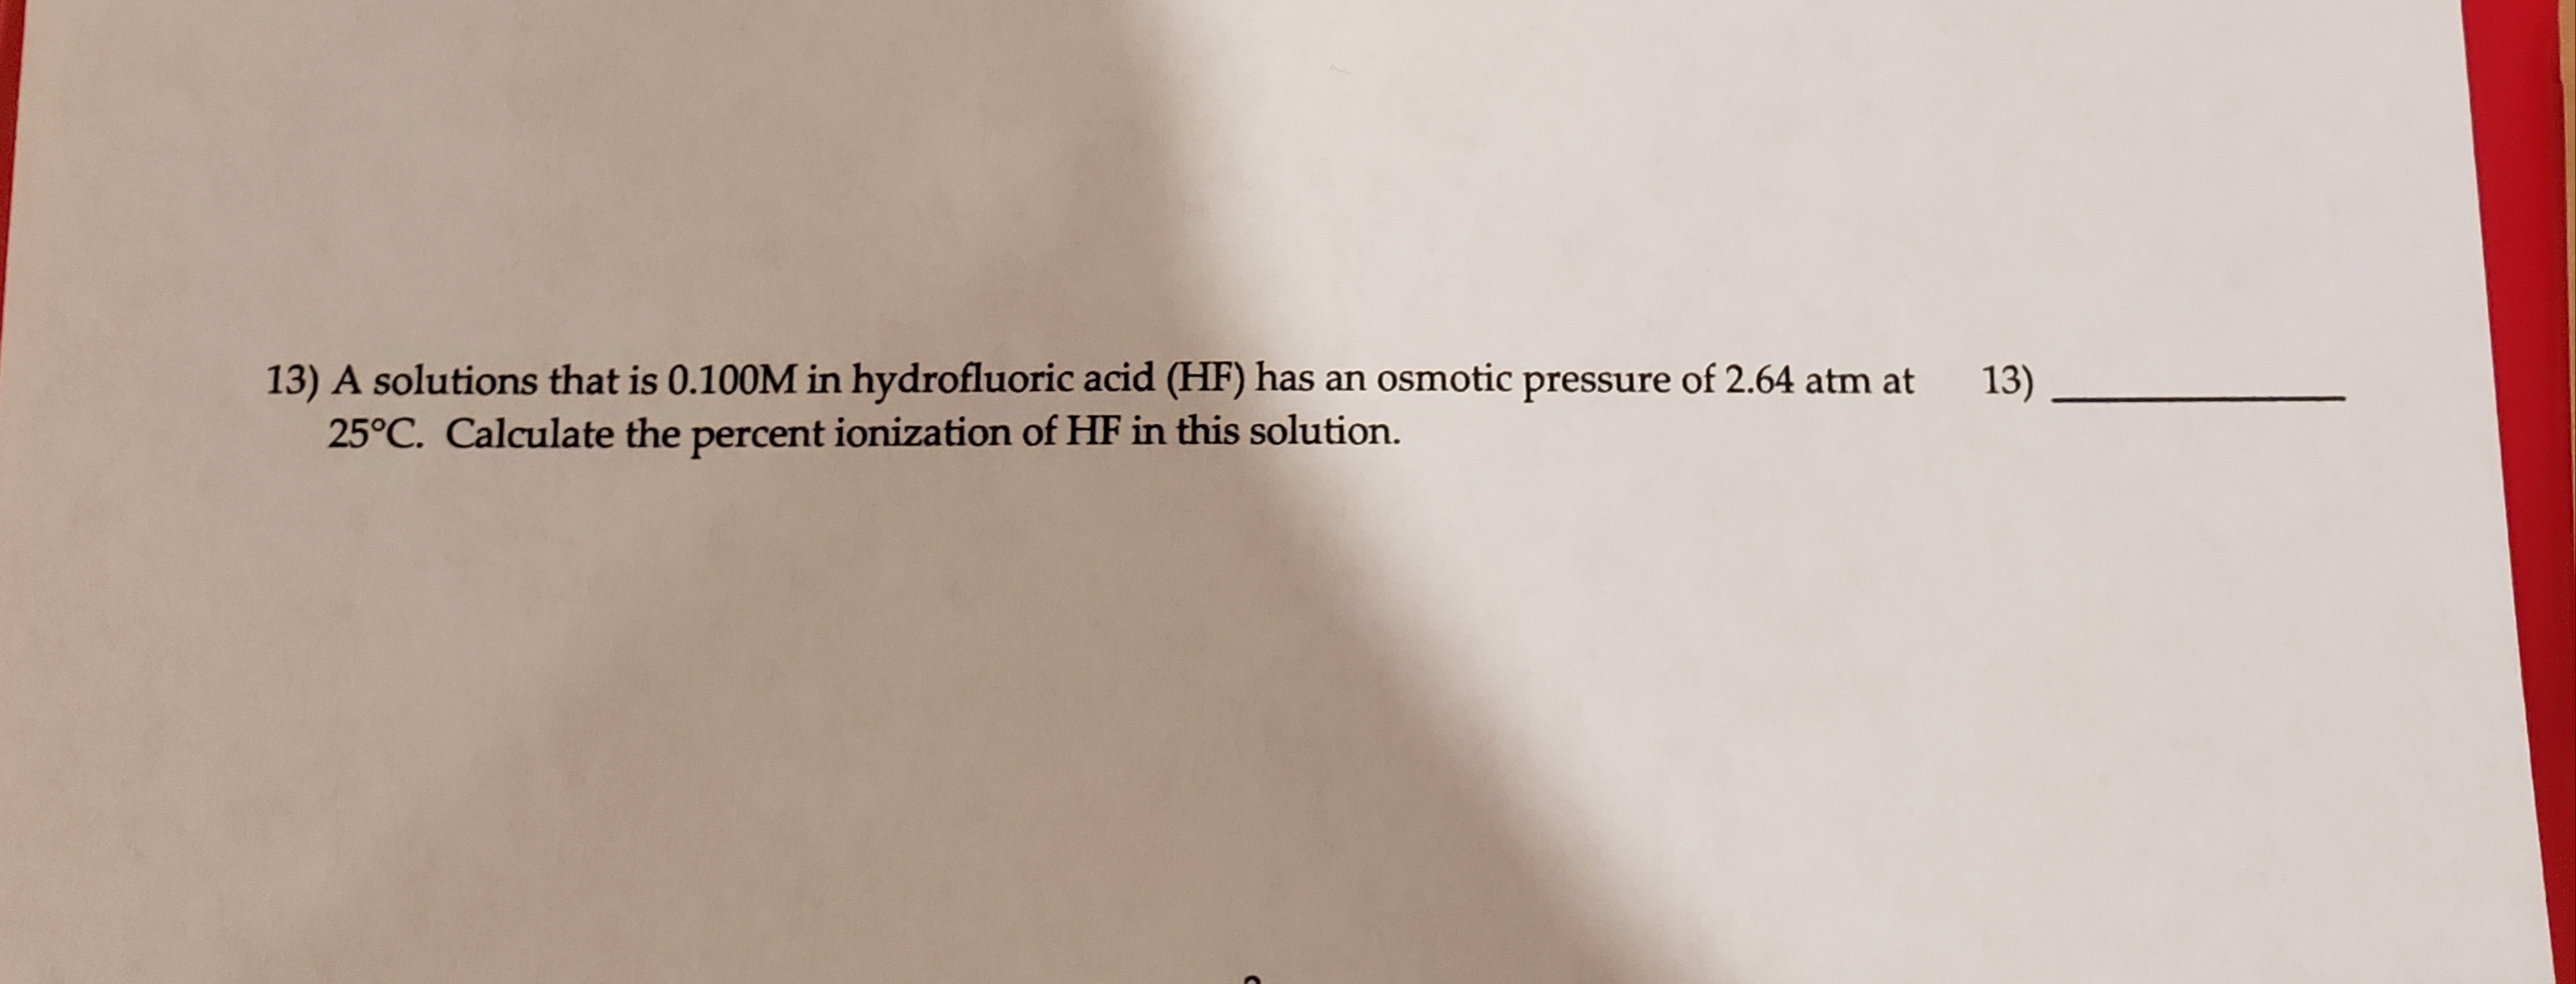 13) A solutions that is 0.100M in hydrofluoric acid (HF) has an osmotic pressure of 2.64 atm at
25°C. Calculate the percent ionization of HF in this solution.
13)
